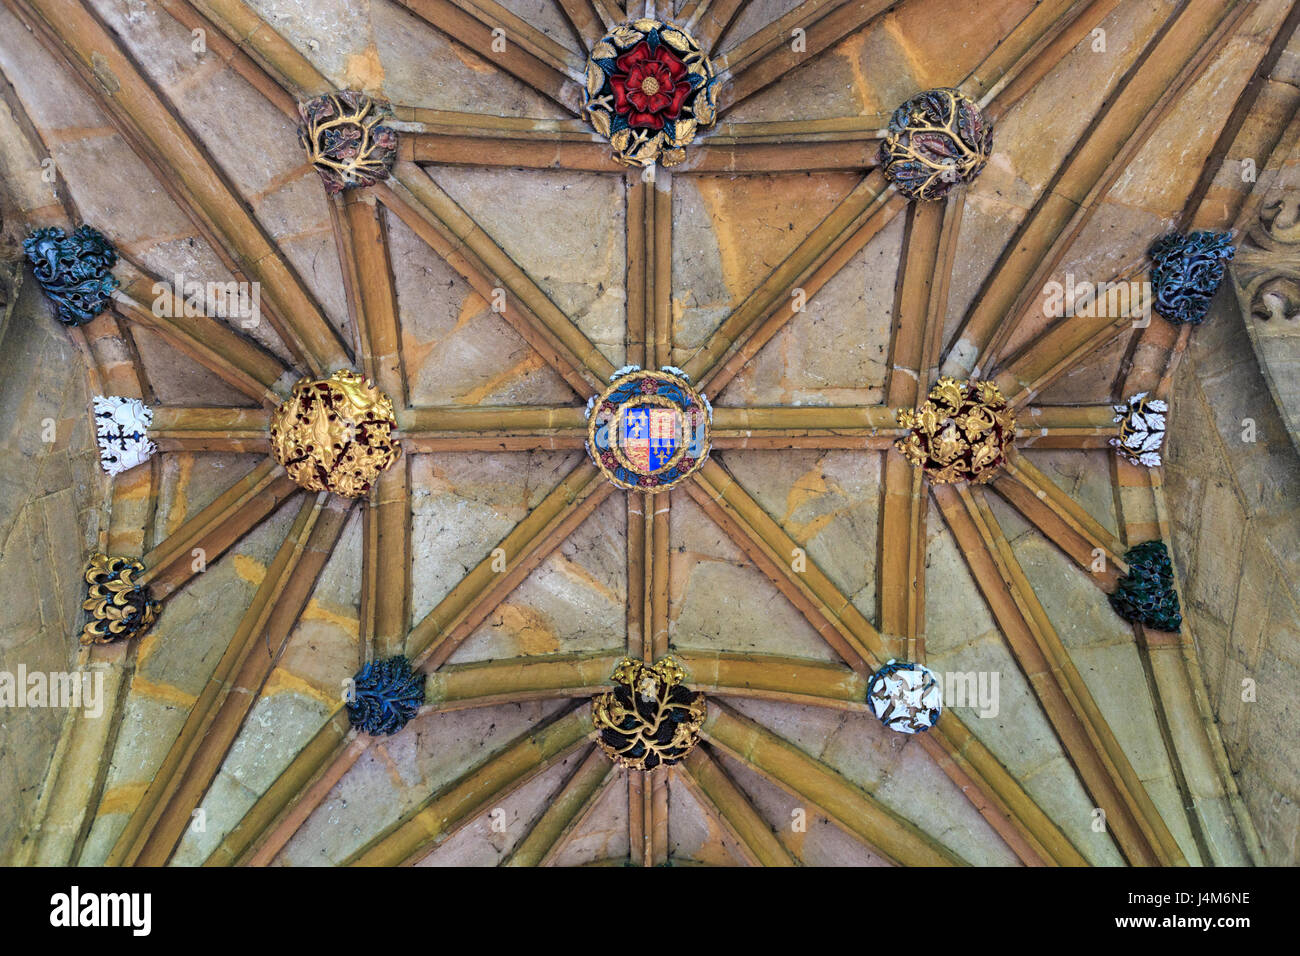 The decorated vaulted ceiling of the cloisters at Magdalen College, Oxford University, England Stock Photo